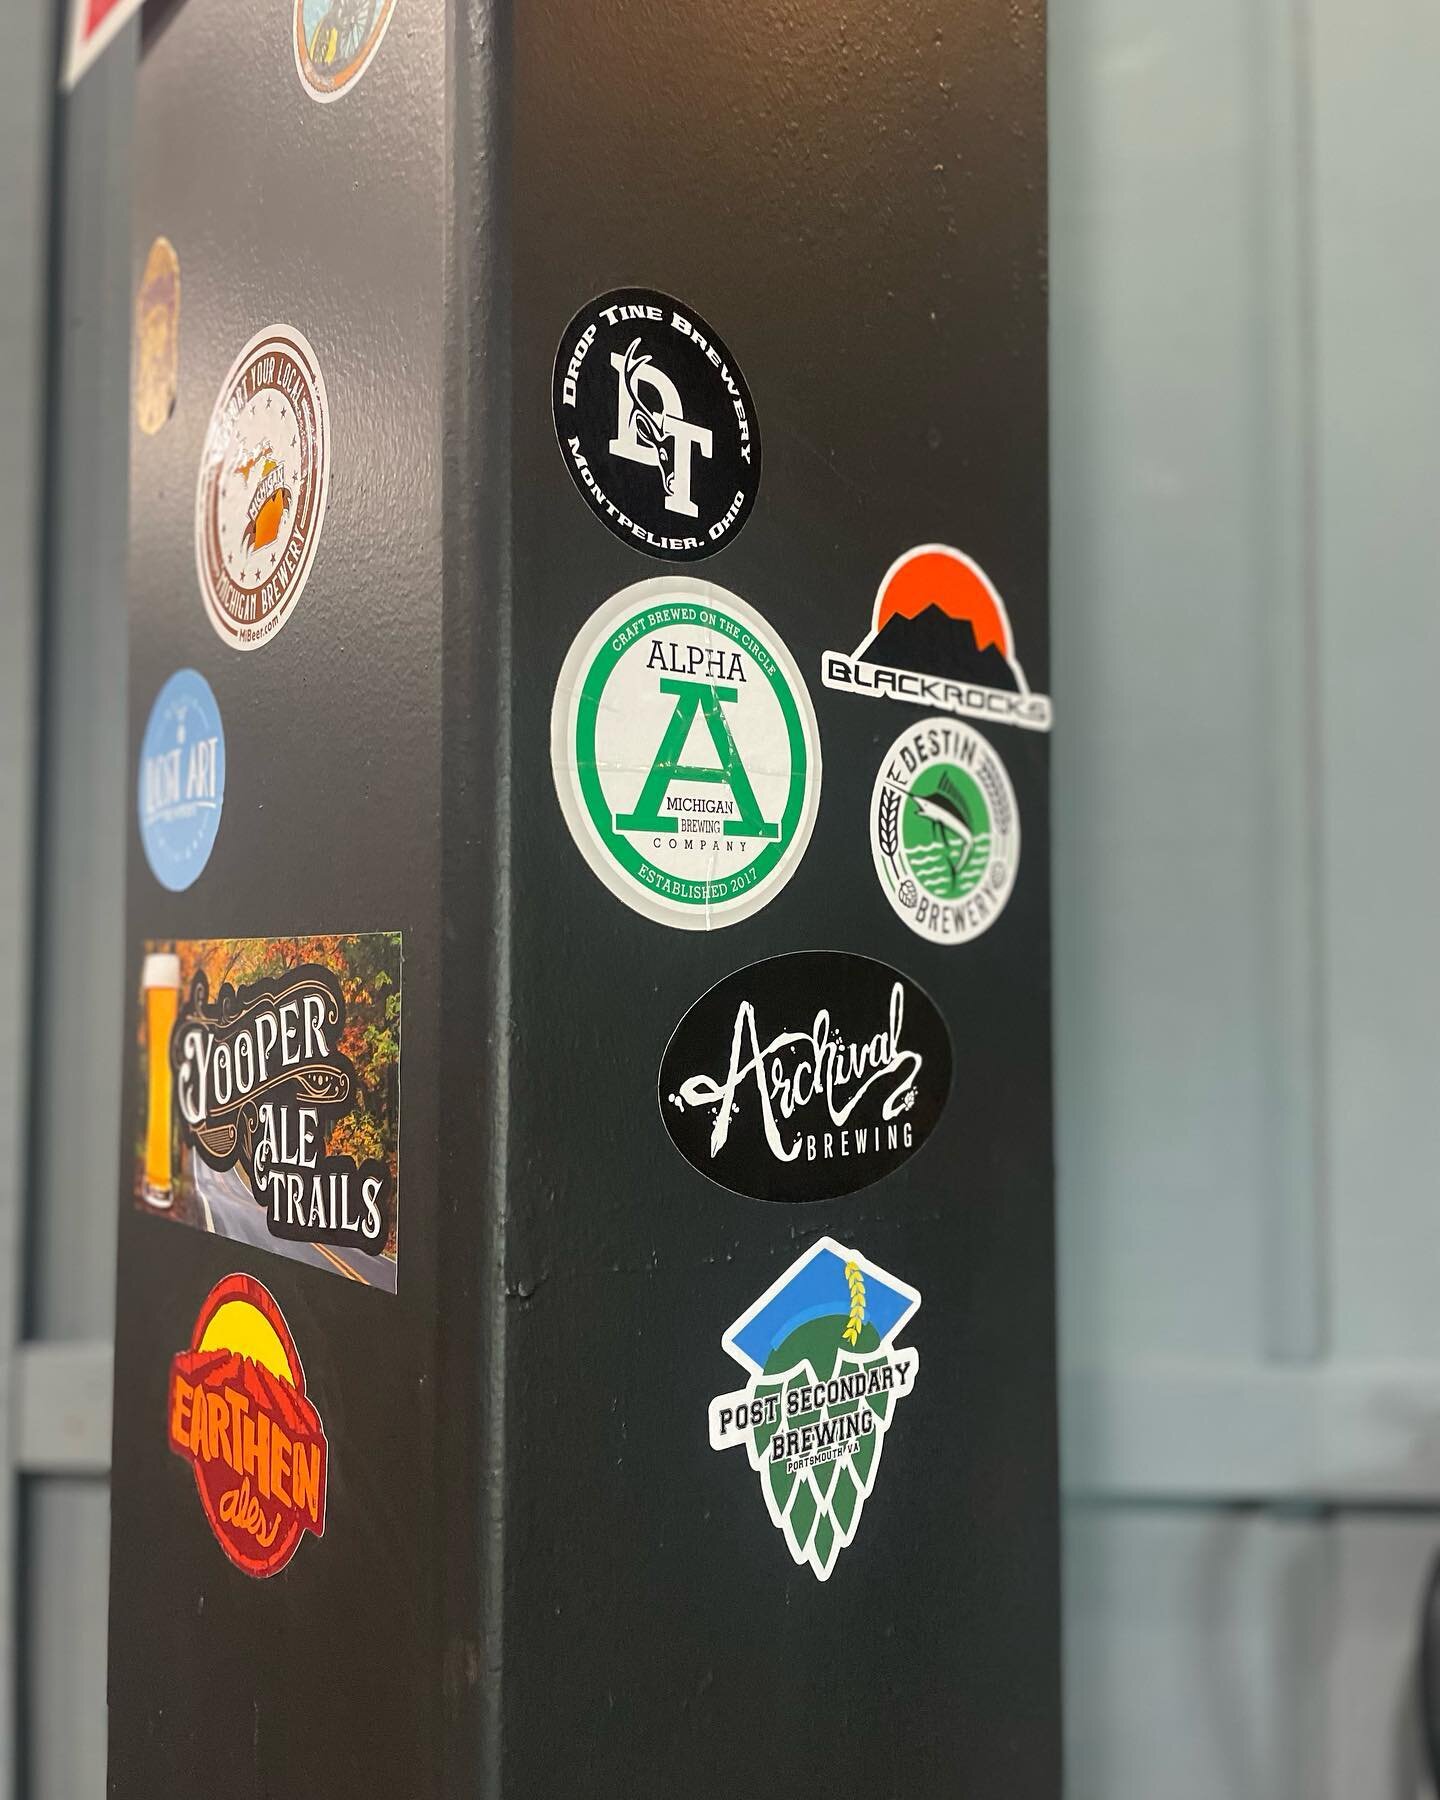 Our sticker pillar is becoming a thing! #brewery #craftbeer #brewing #beerfriends